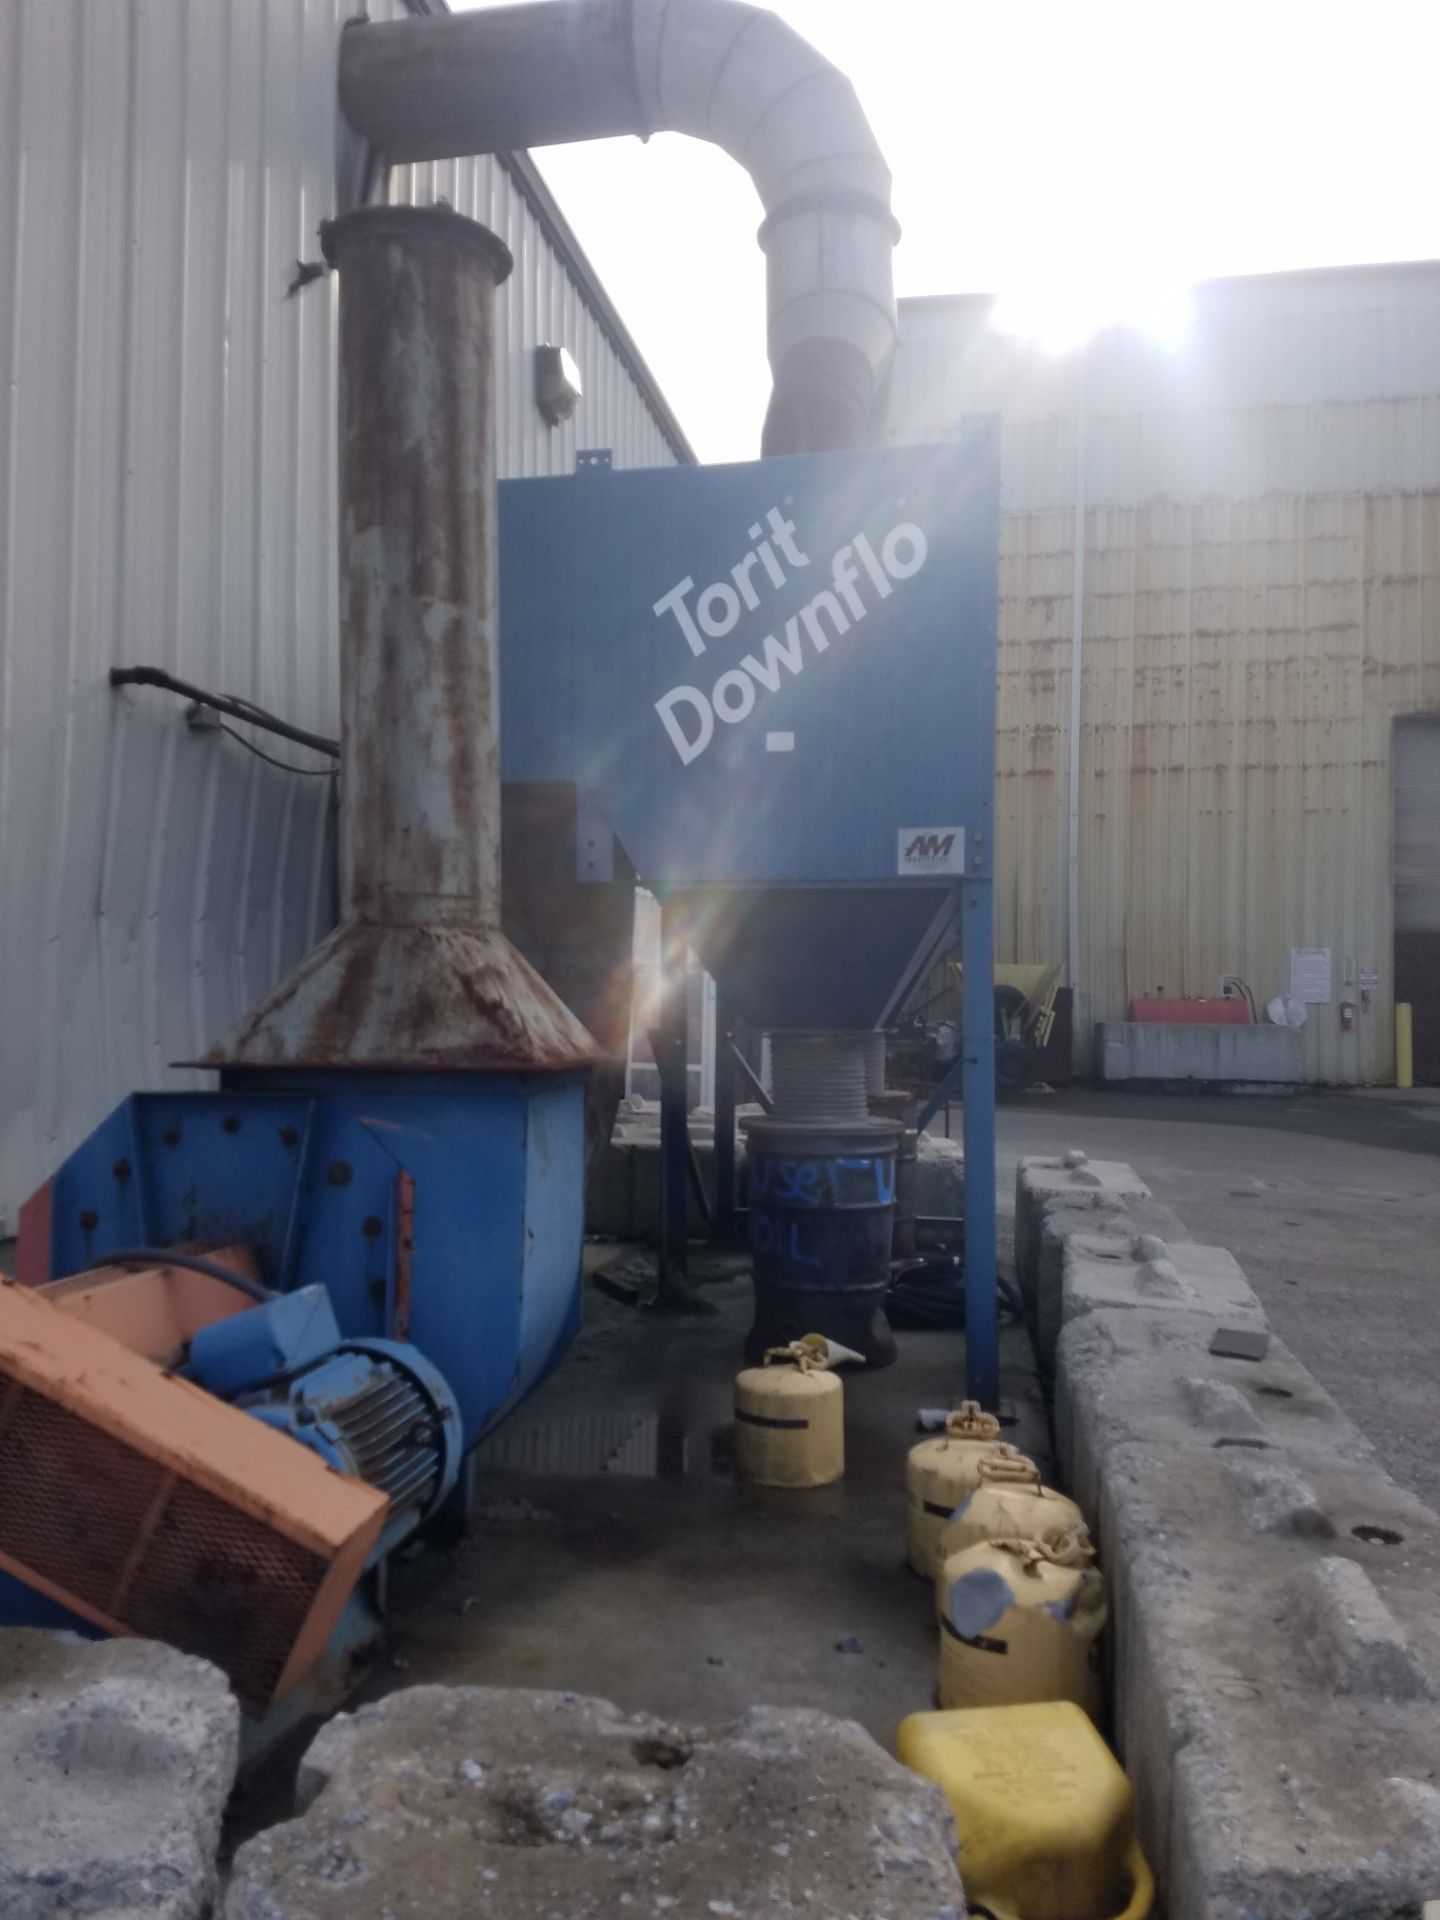 TORIT DONALDSON "DOWNFLO" MDL. 2DF24 DUST COLLECTOR, 50HP (OUTSIDE UNIT) (MILLVILLE, NJ) - Image 7 of 9